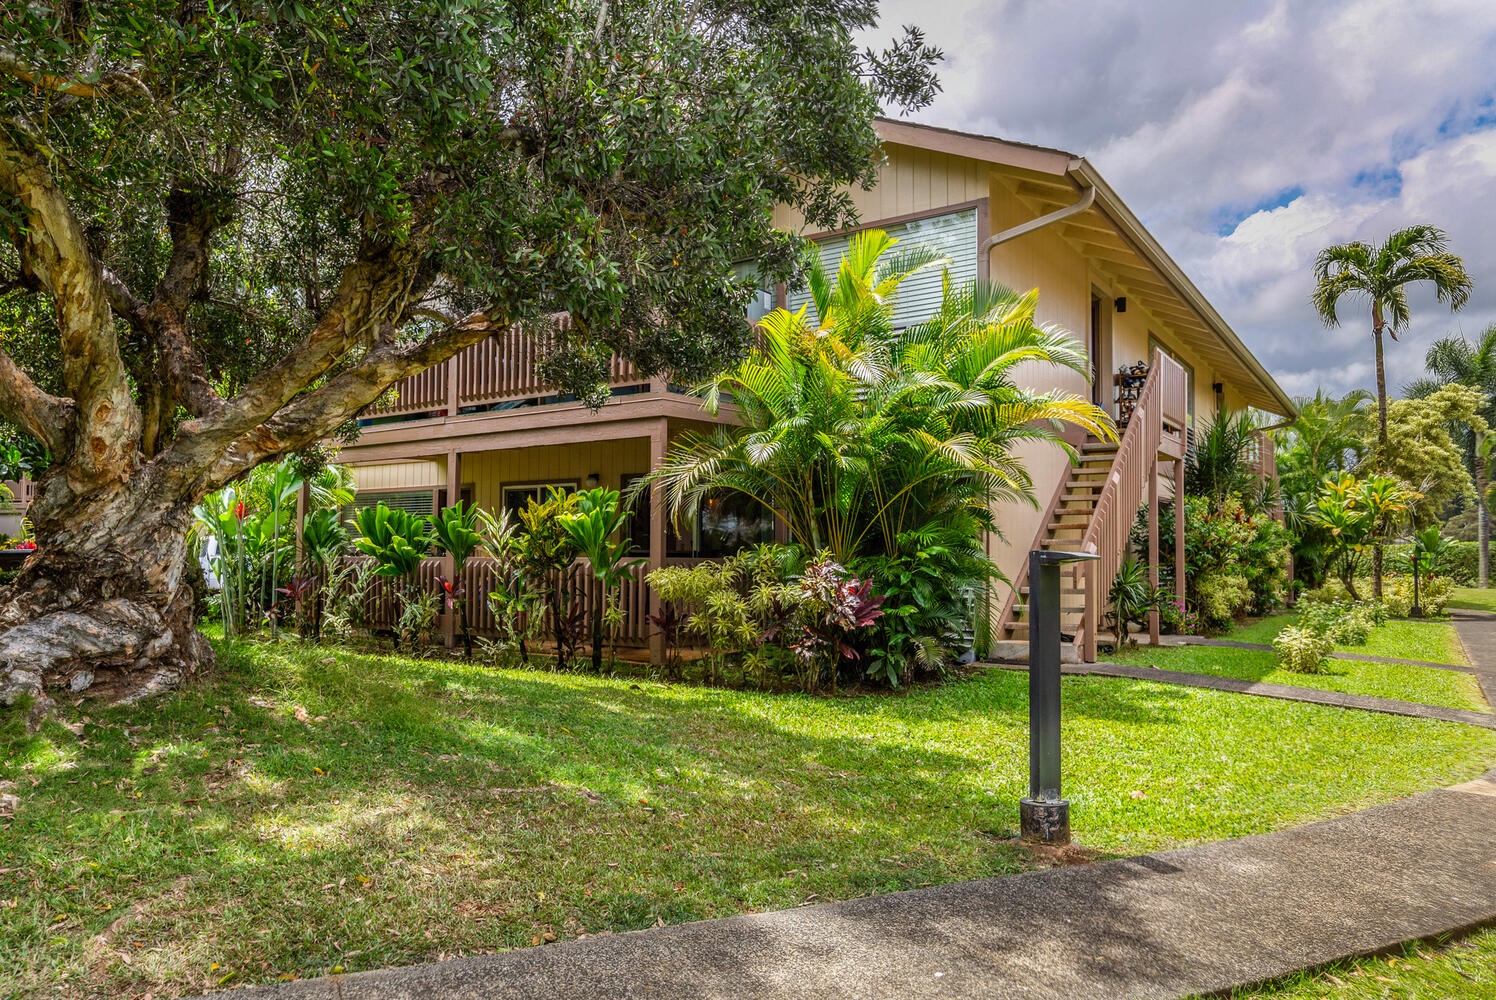 Princeville Vacation Rentals, Hideaway Haven - Lush greenery welcomes you to Hideaway Haven!